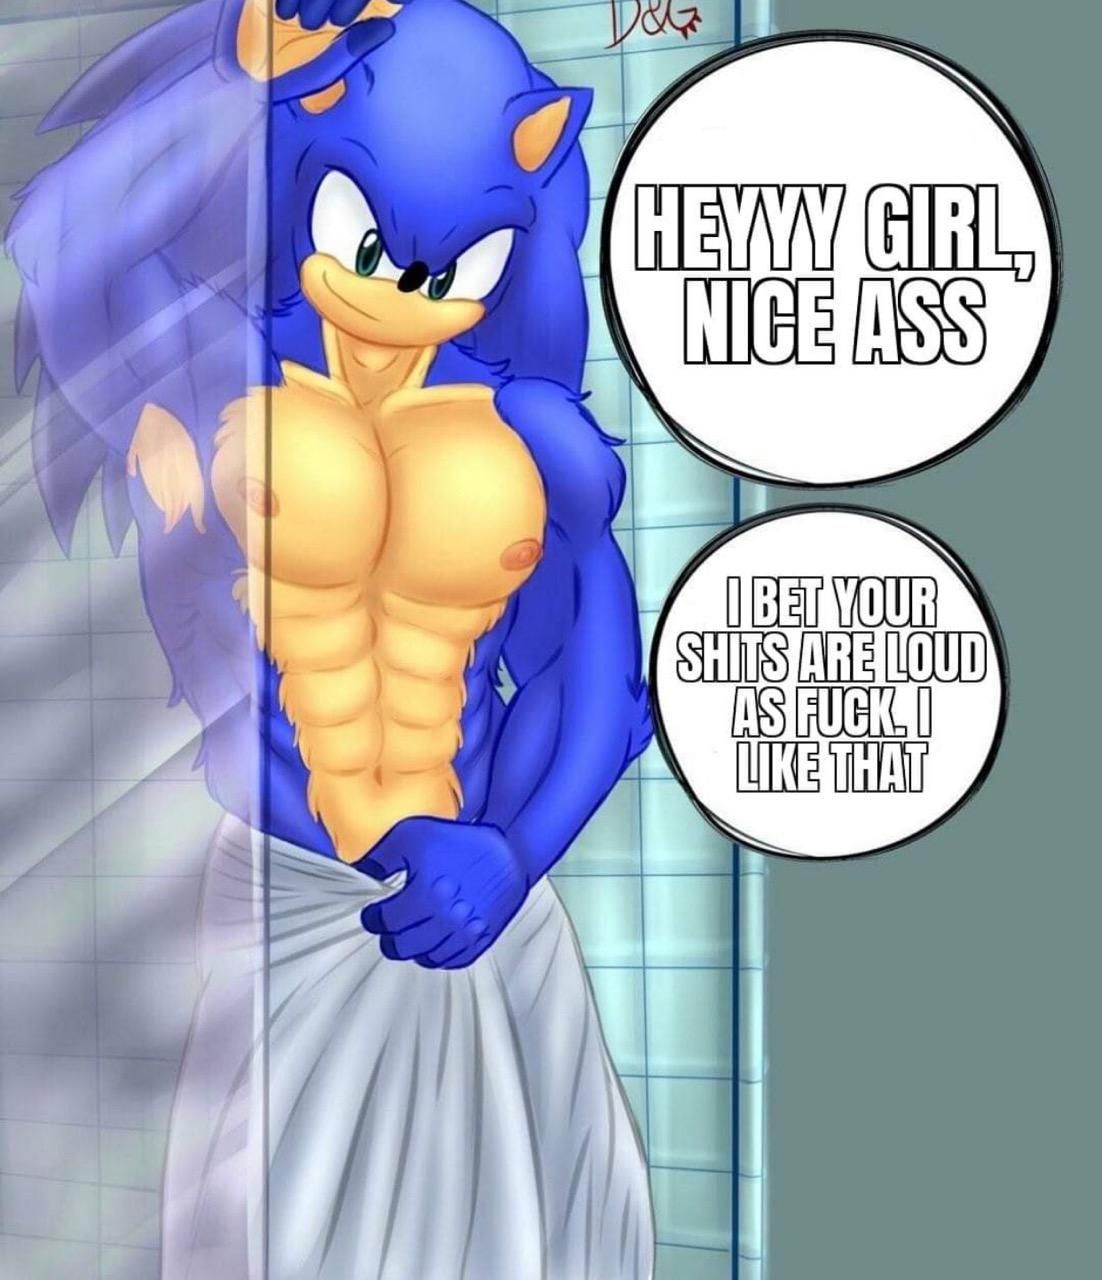 That's My boy Sonic for you